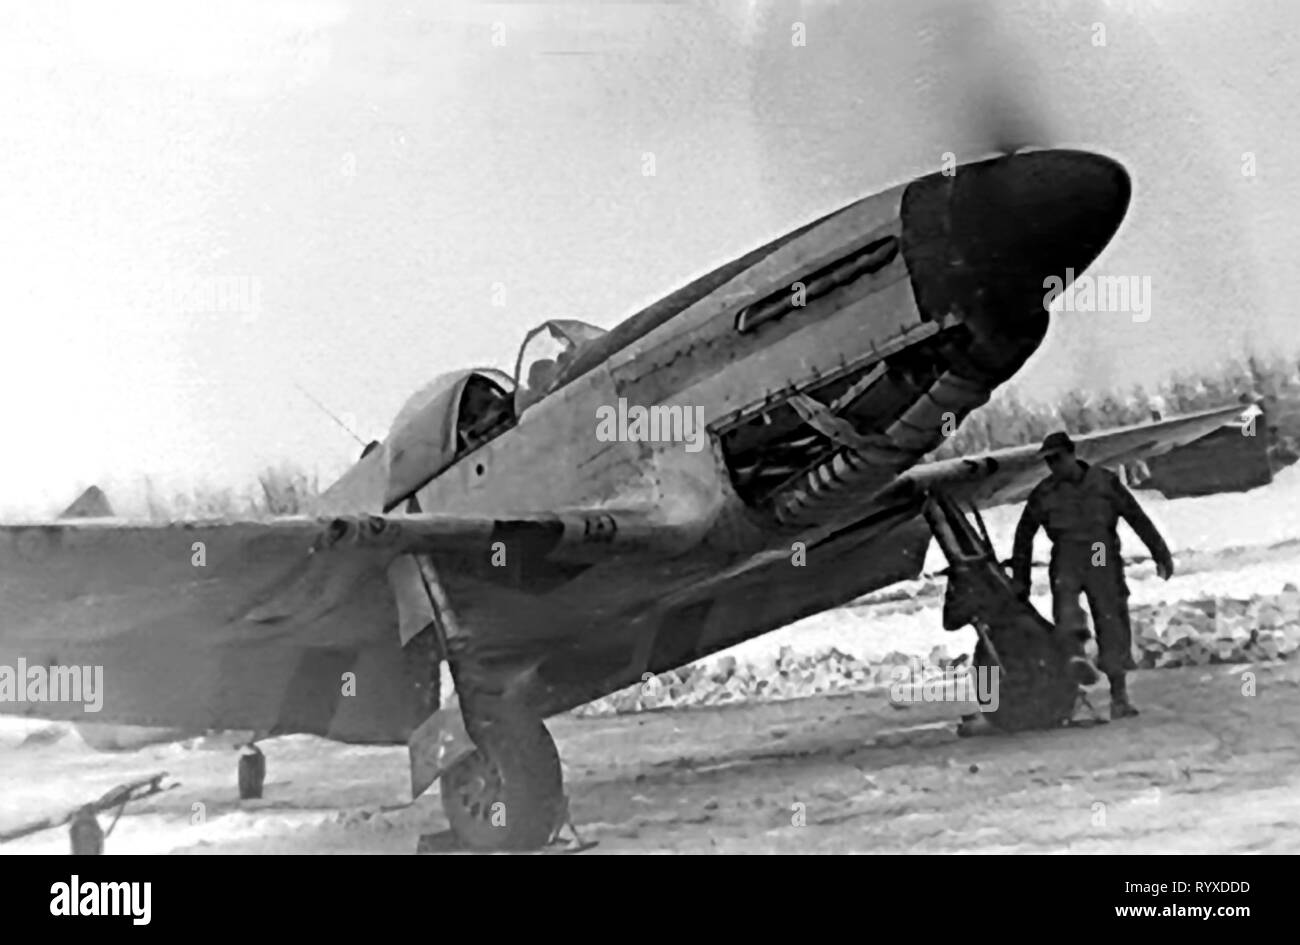 Personal photographs and memorabilia of fighting Americans during the Second World War. P-51 Mustang fighter maintenance ground crew. Stock Photo